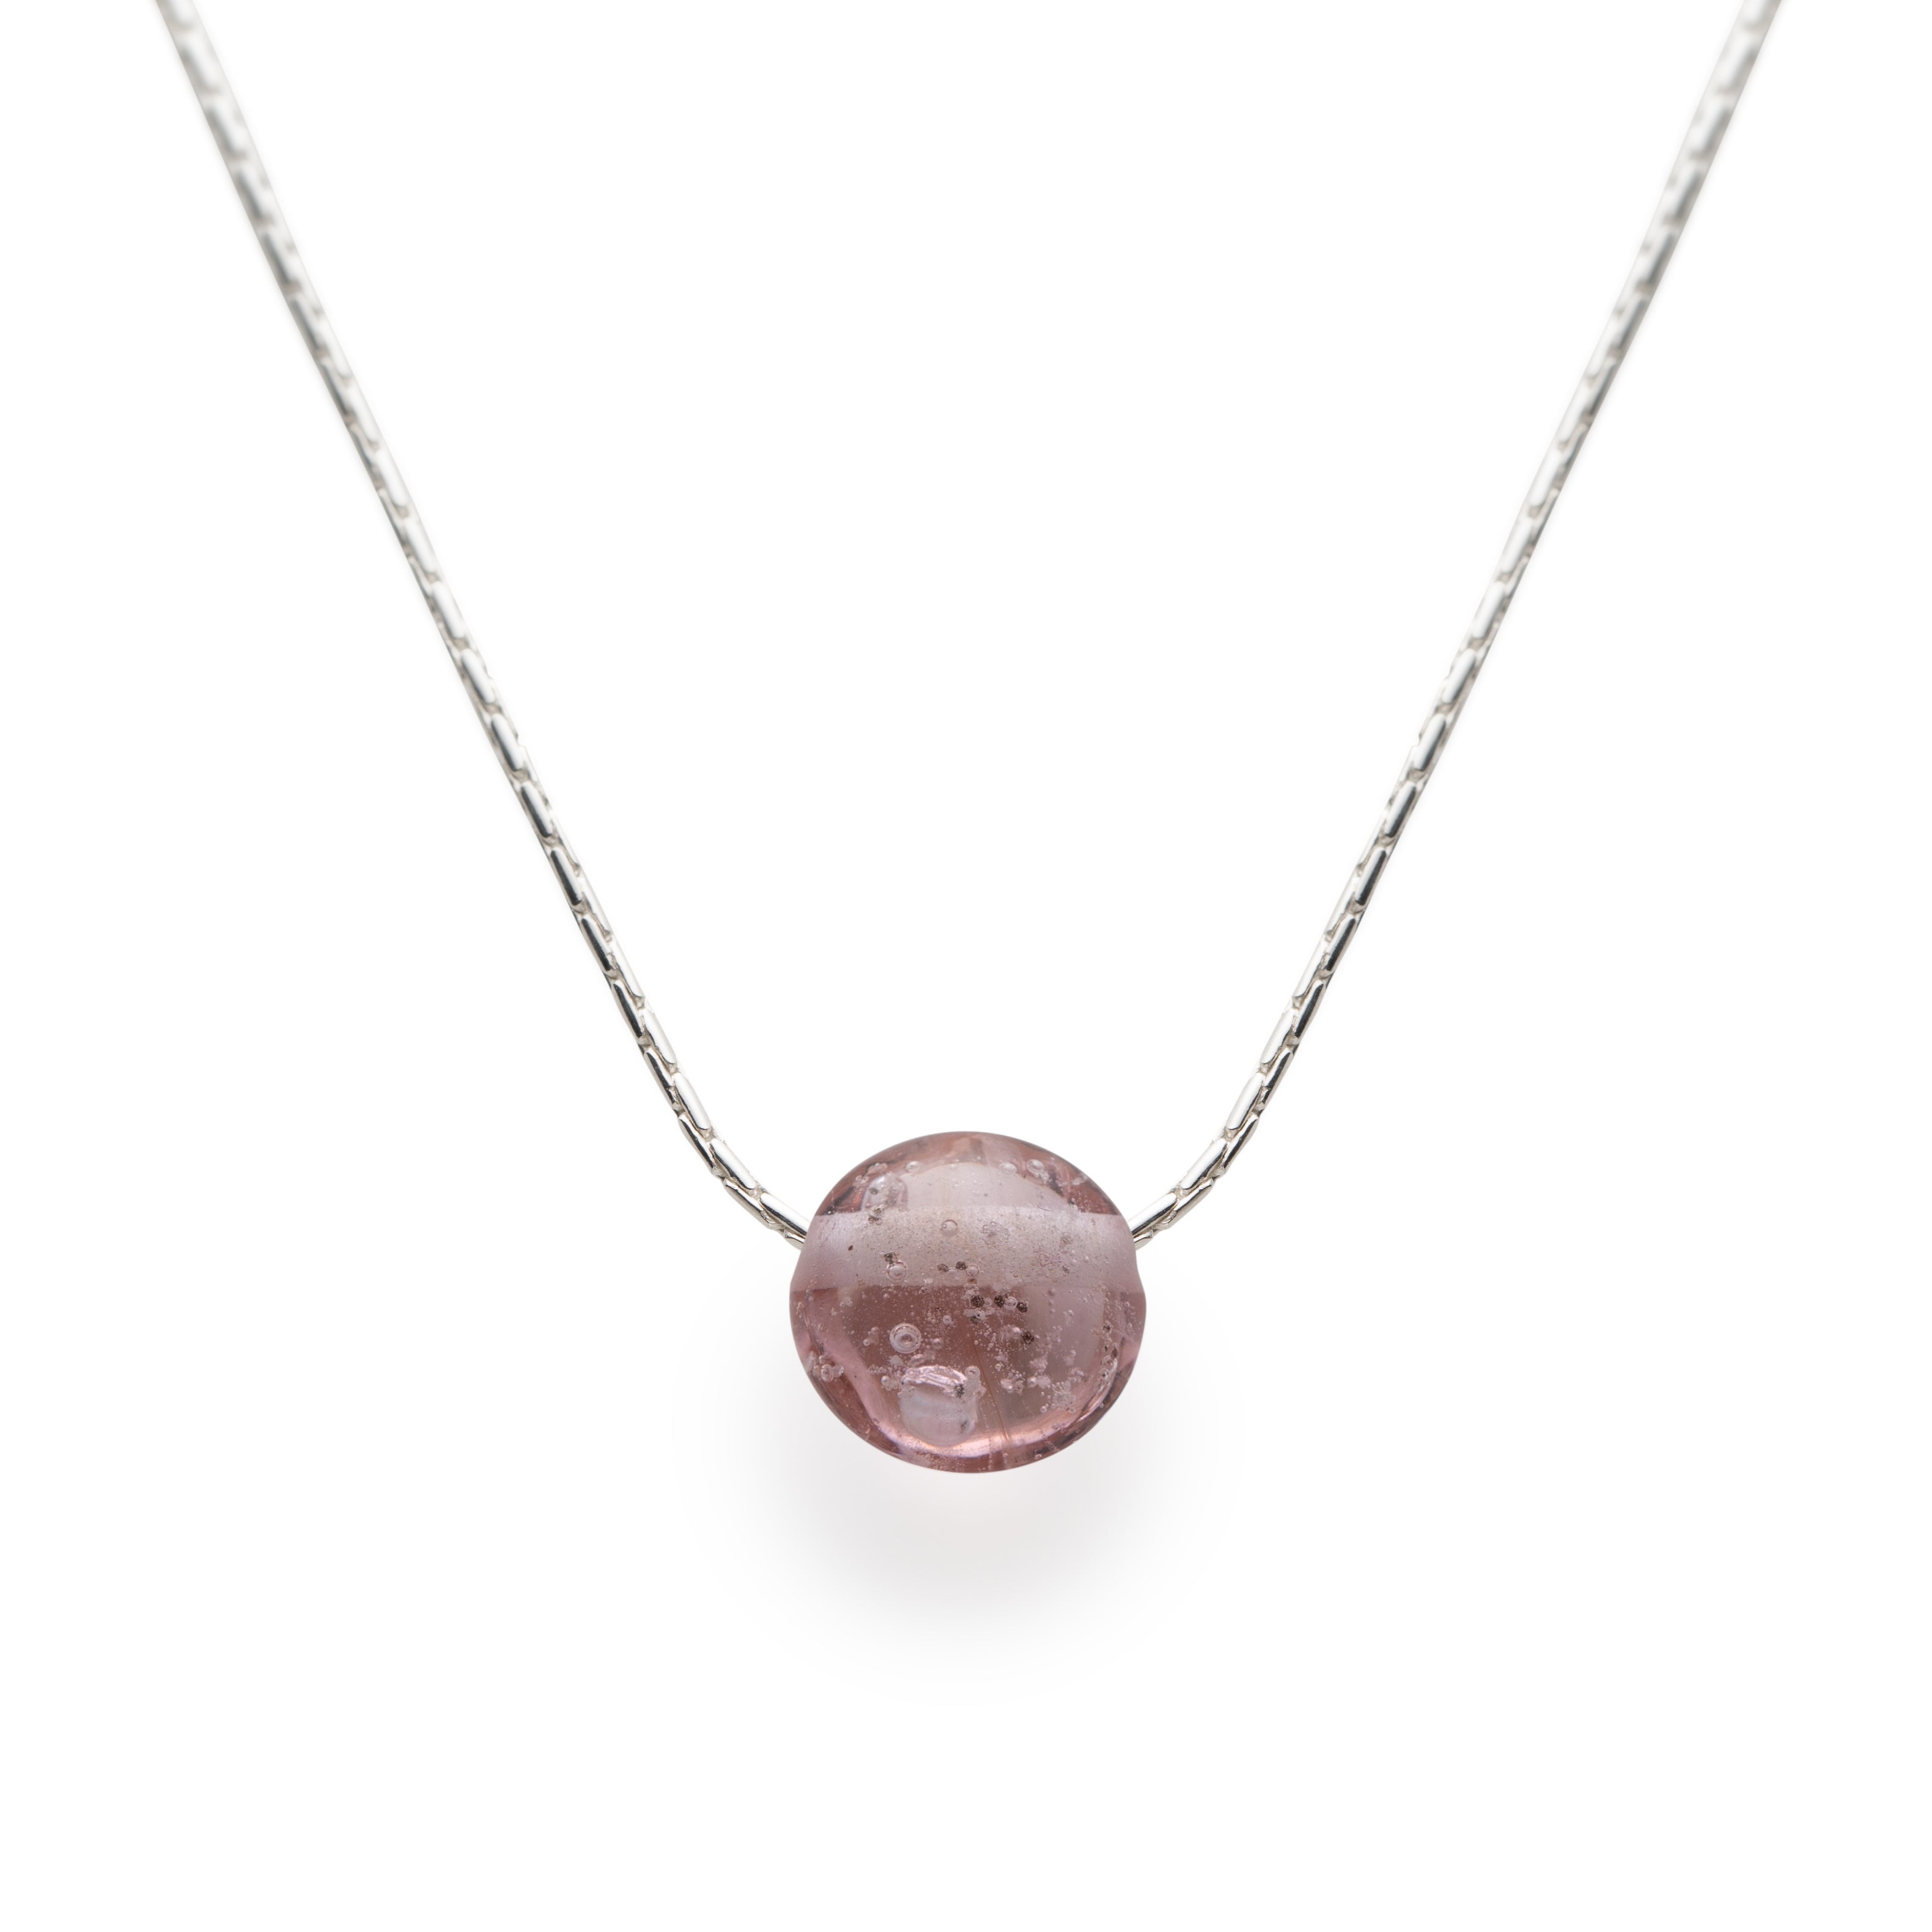 Silver Sand Pebble Necklace - Pale Pink